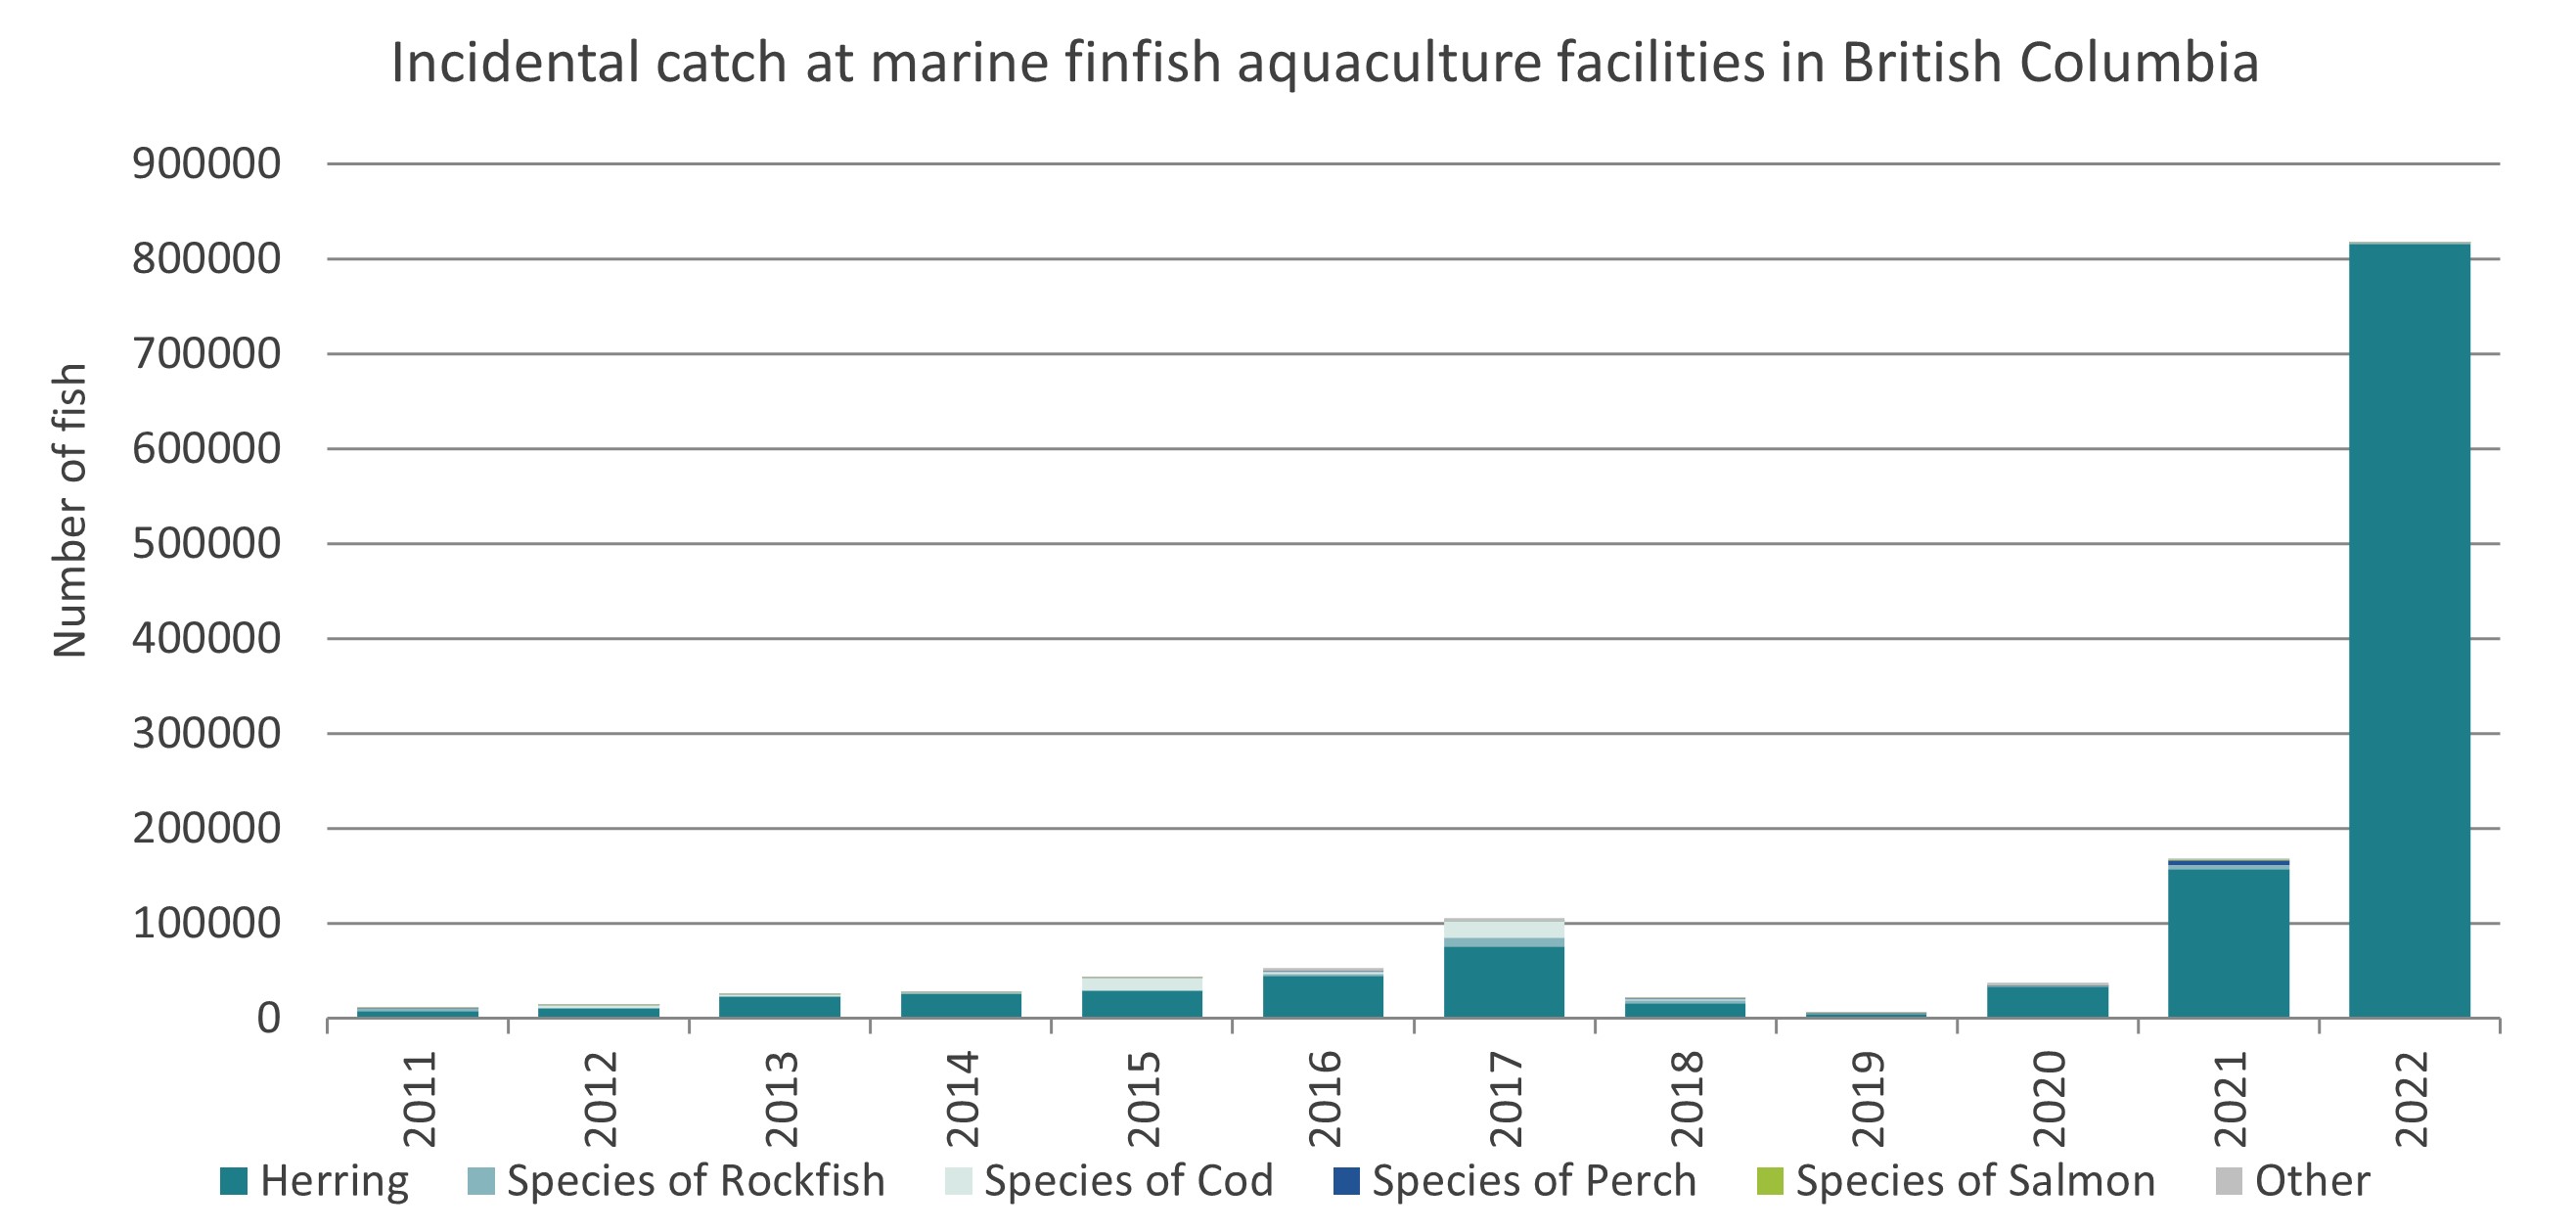 Incidental catch at marine finfish aquaculture facilities in British Columbia, 2011 to 2020